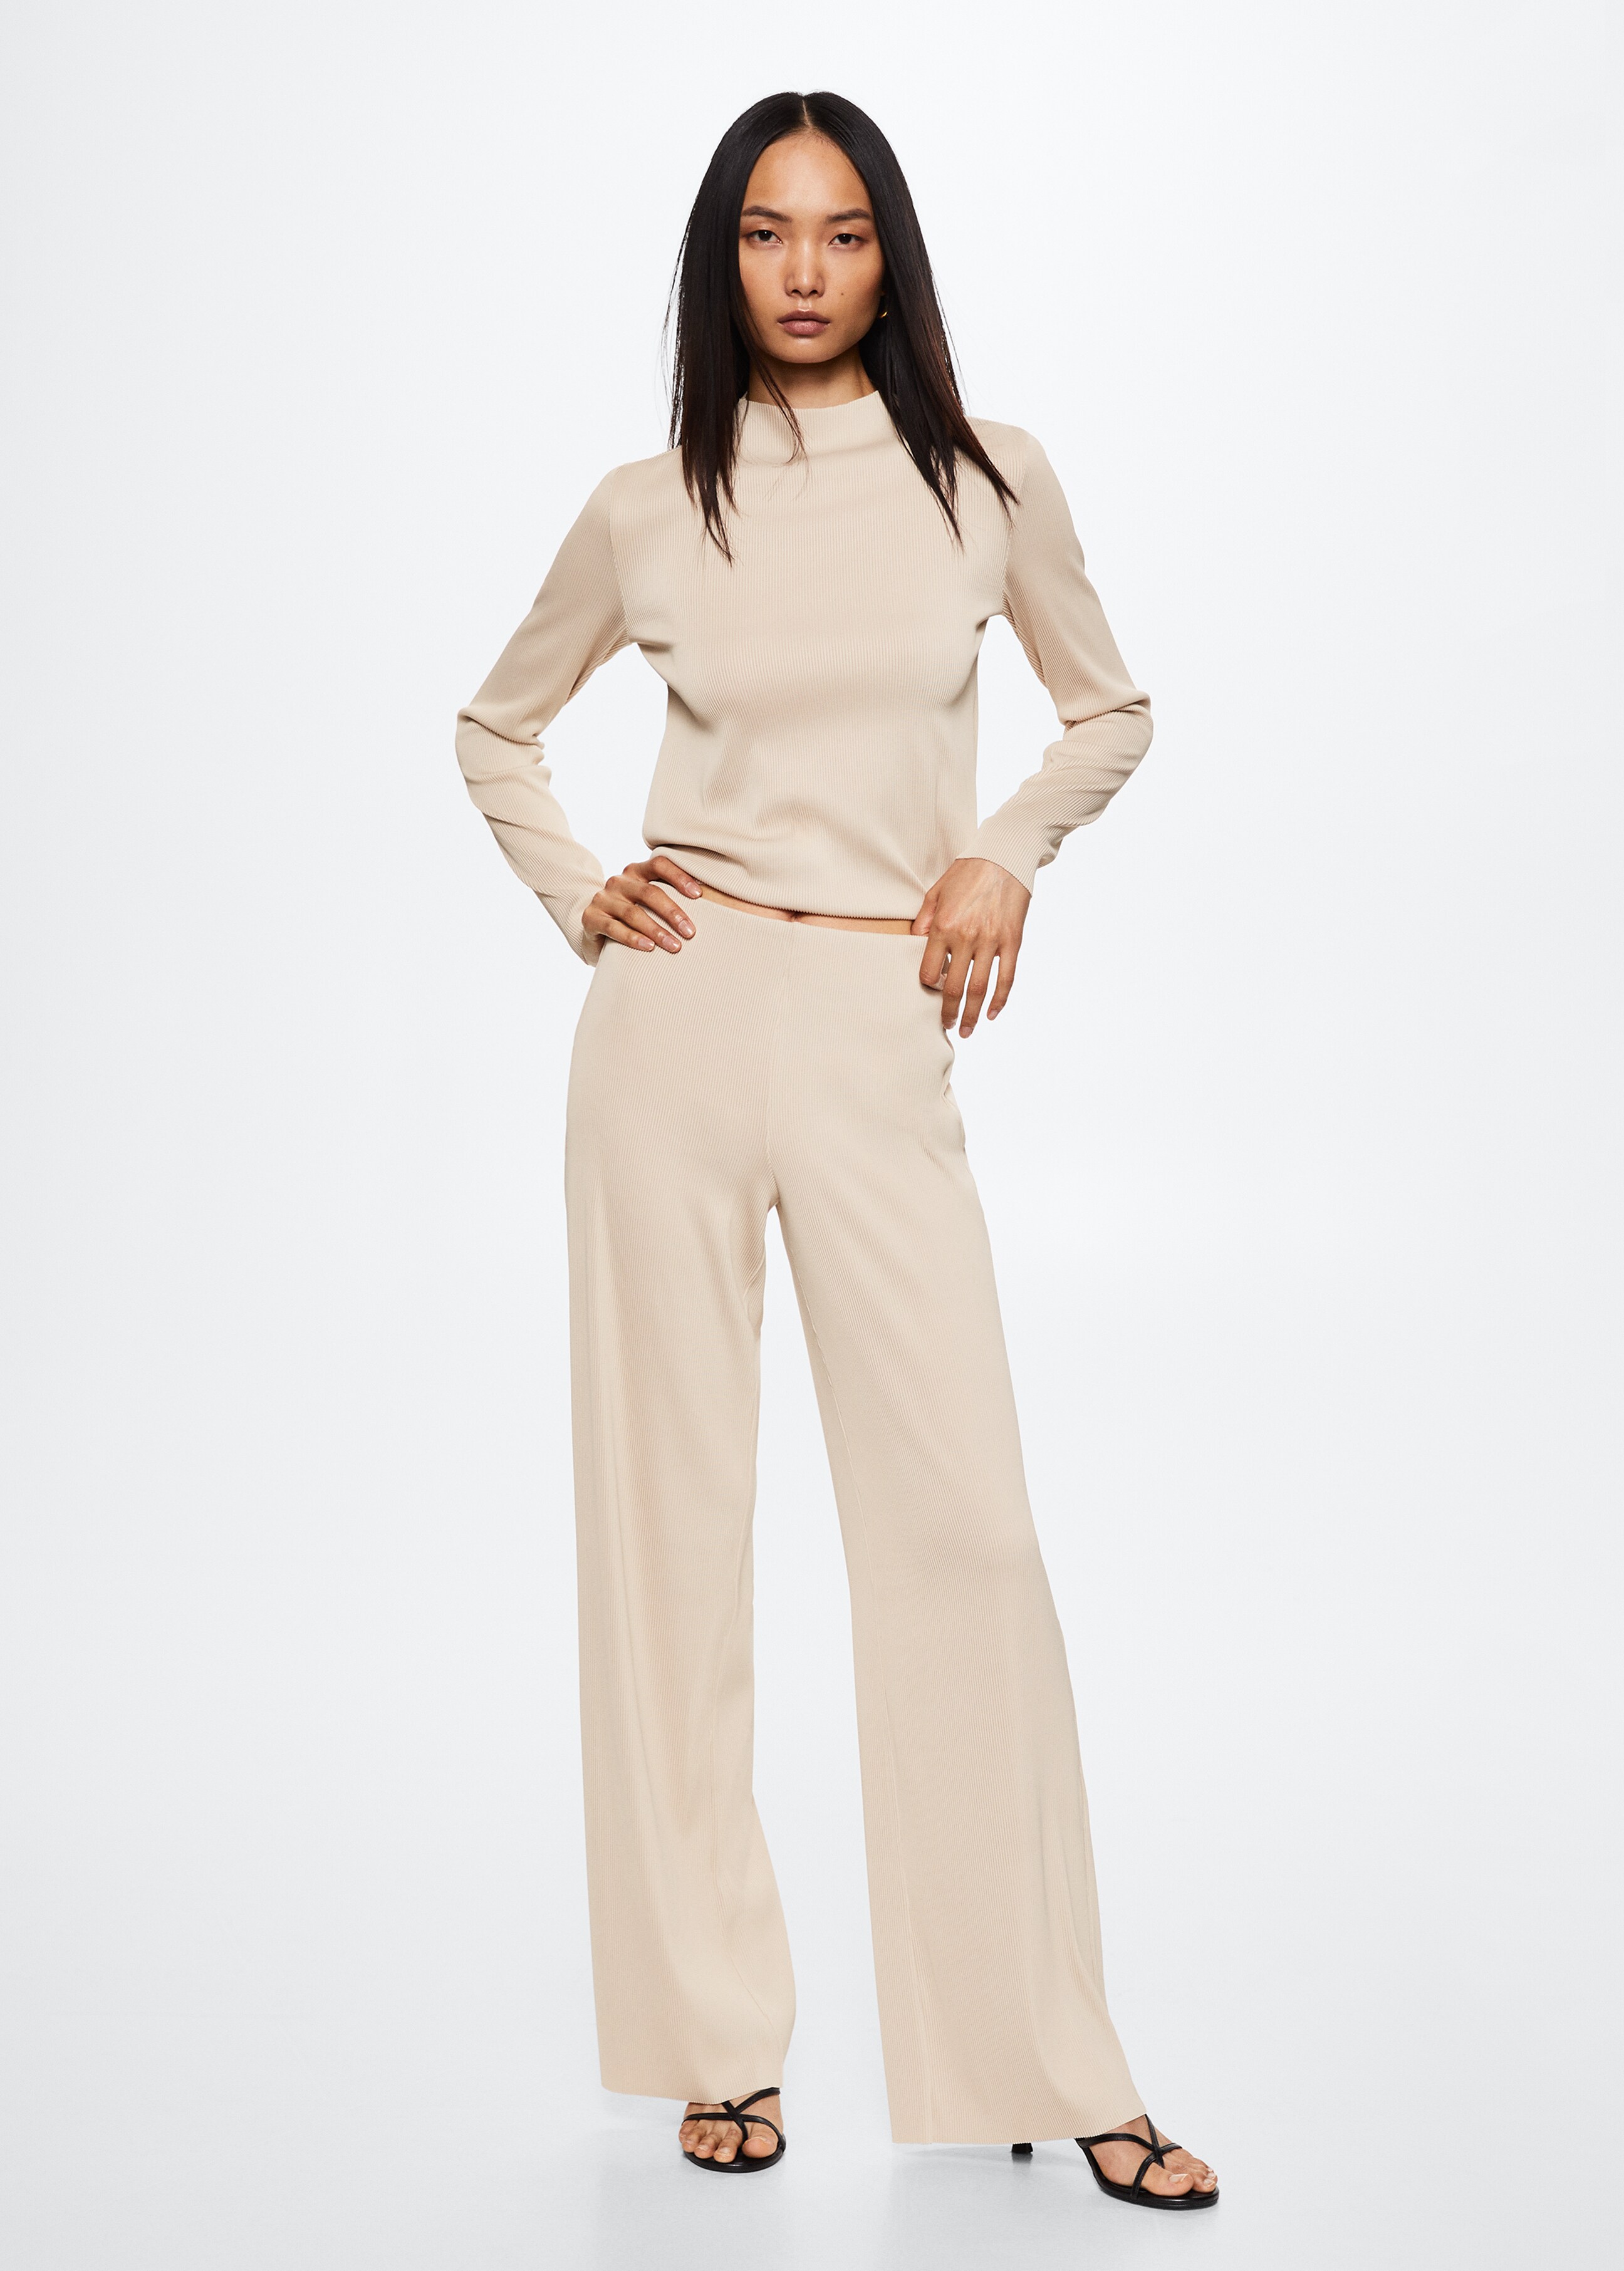 Pleated palazzo trousers - General plane